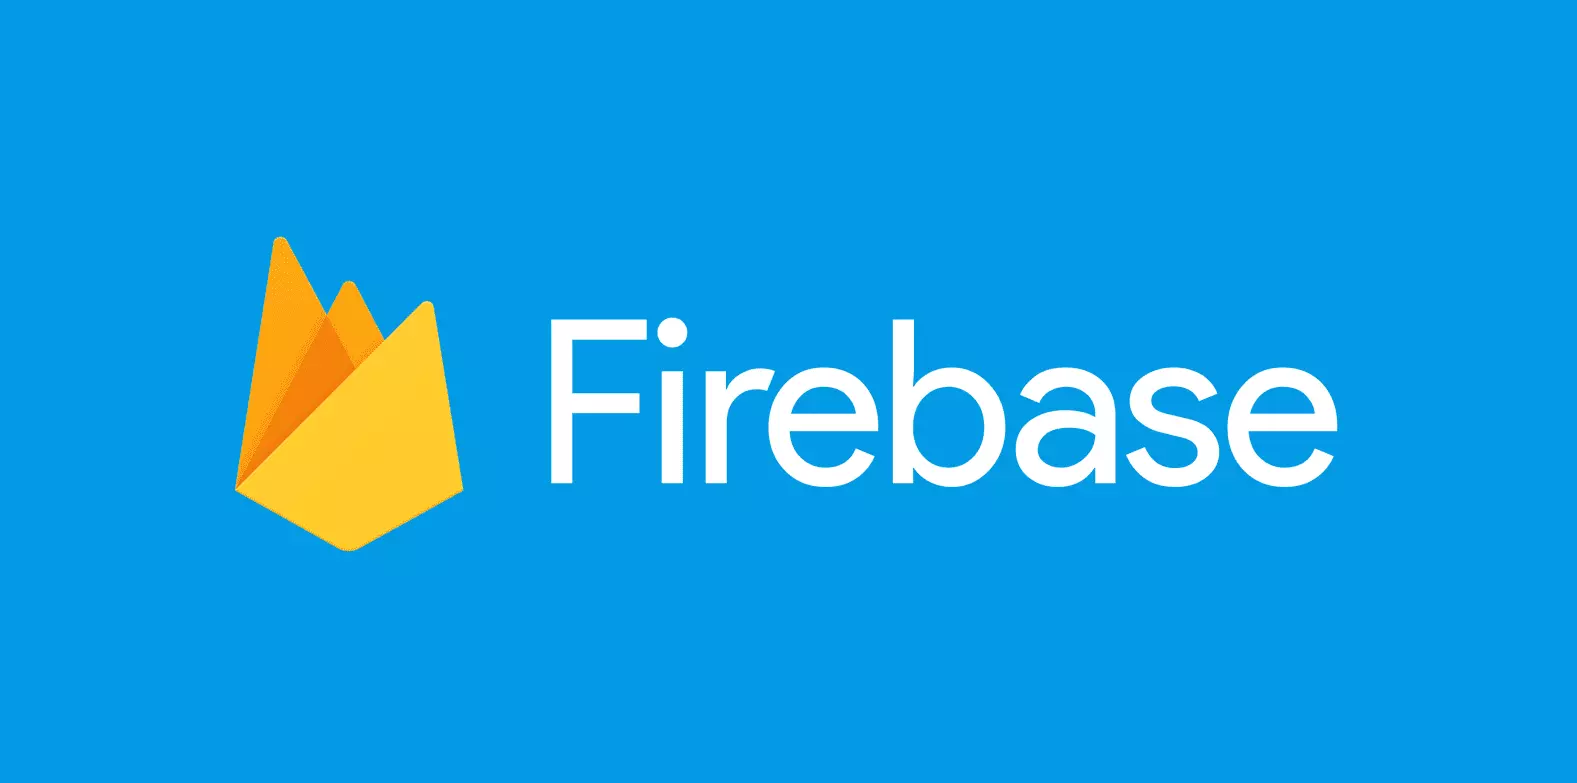 Cover Image for How to Deploy a Website on Firebase: A Step-by-Step Guide